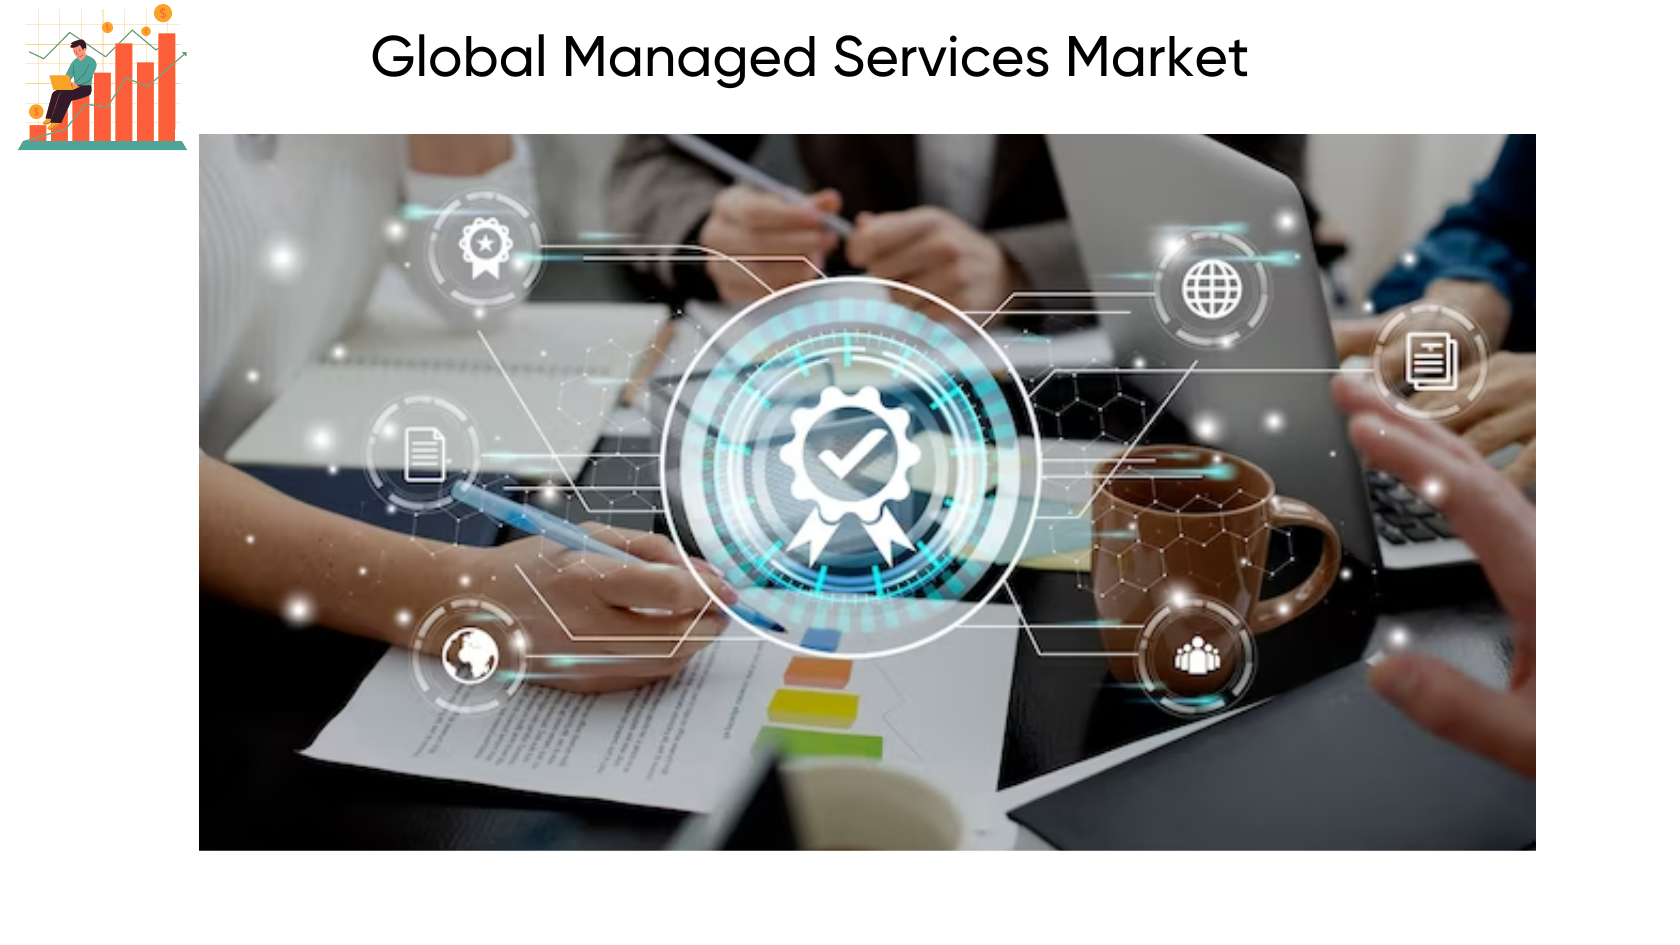 Managed Services Market Sales to Top USD 834.7 Billion by 2032 | CAGR of 11.9%